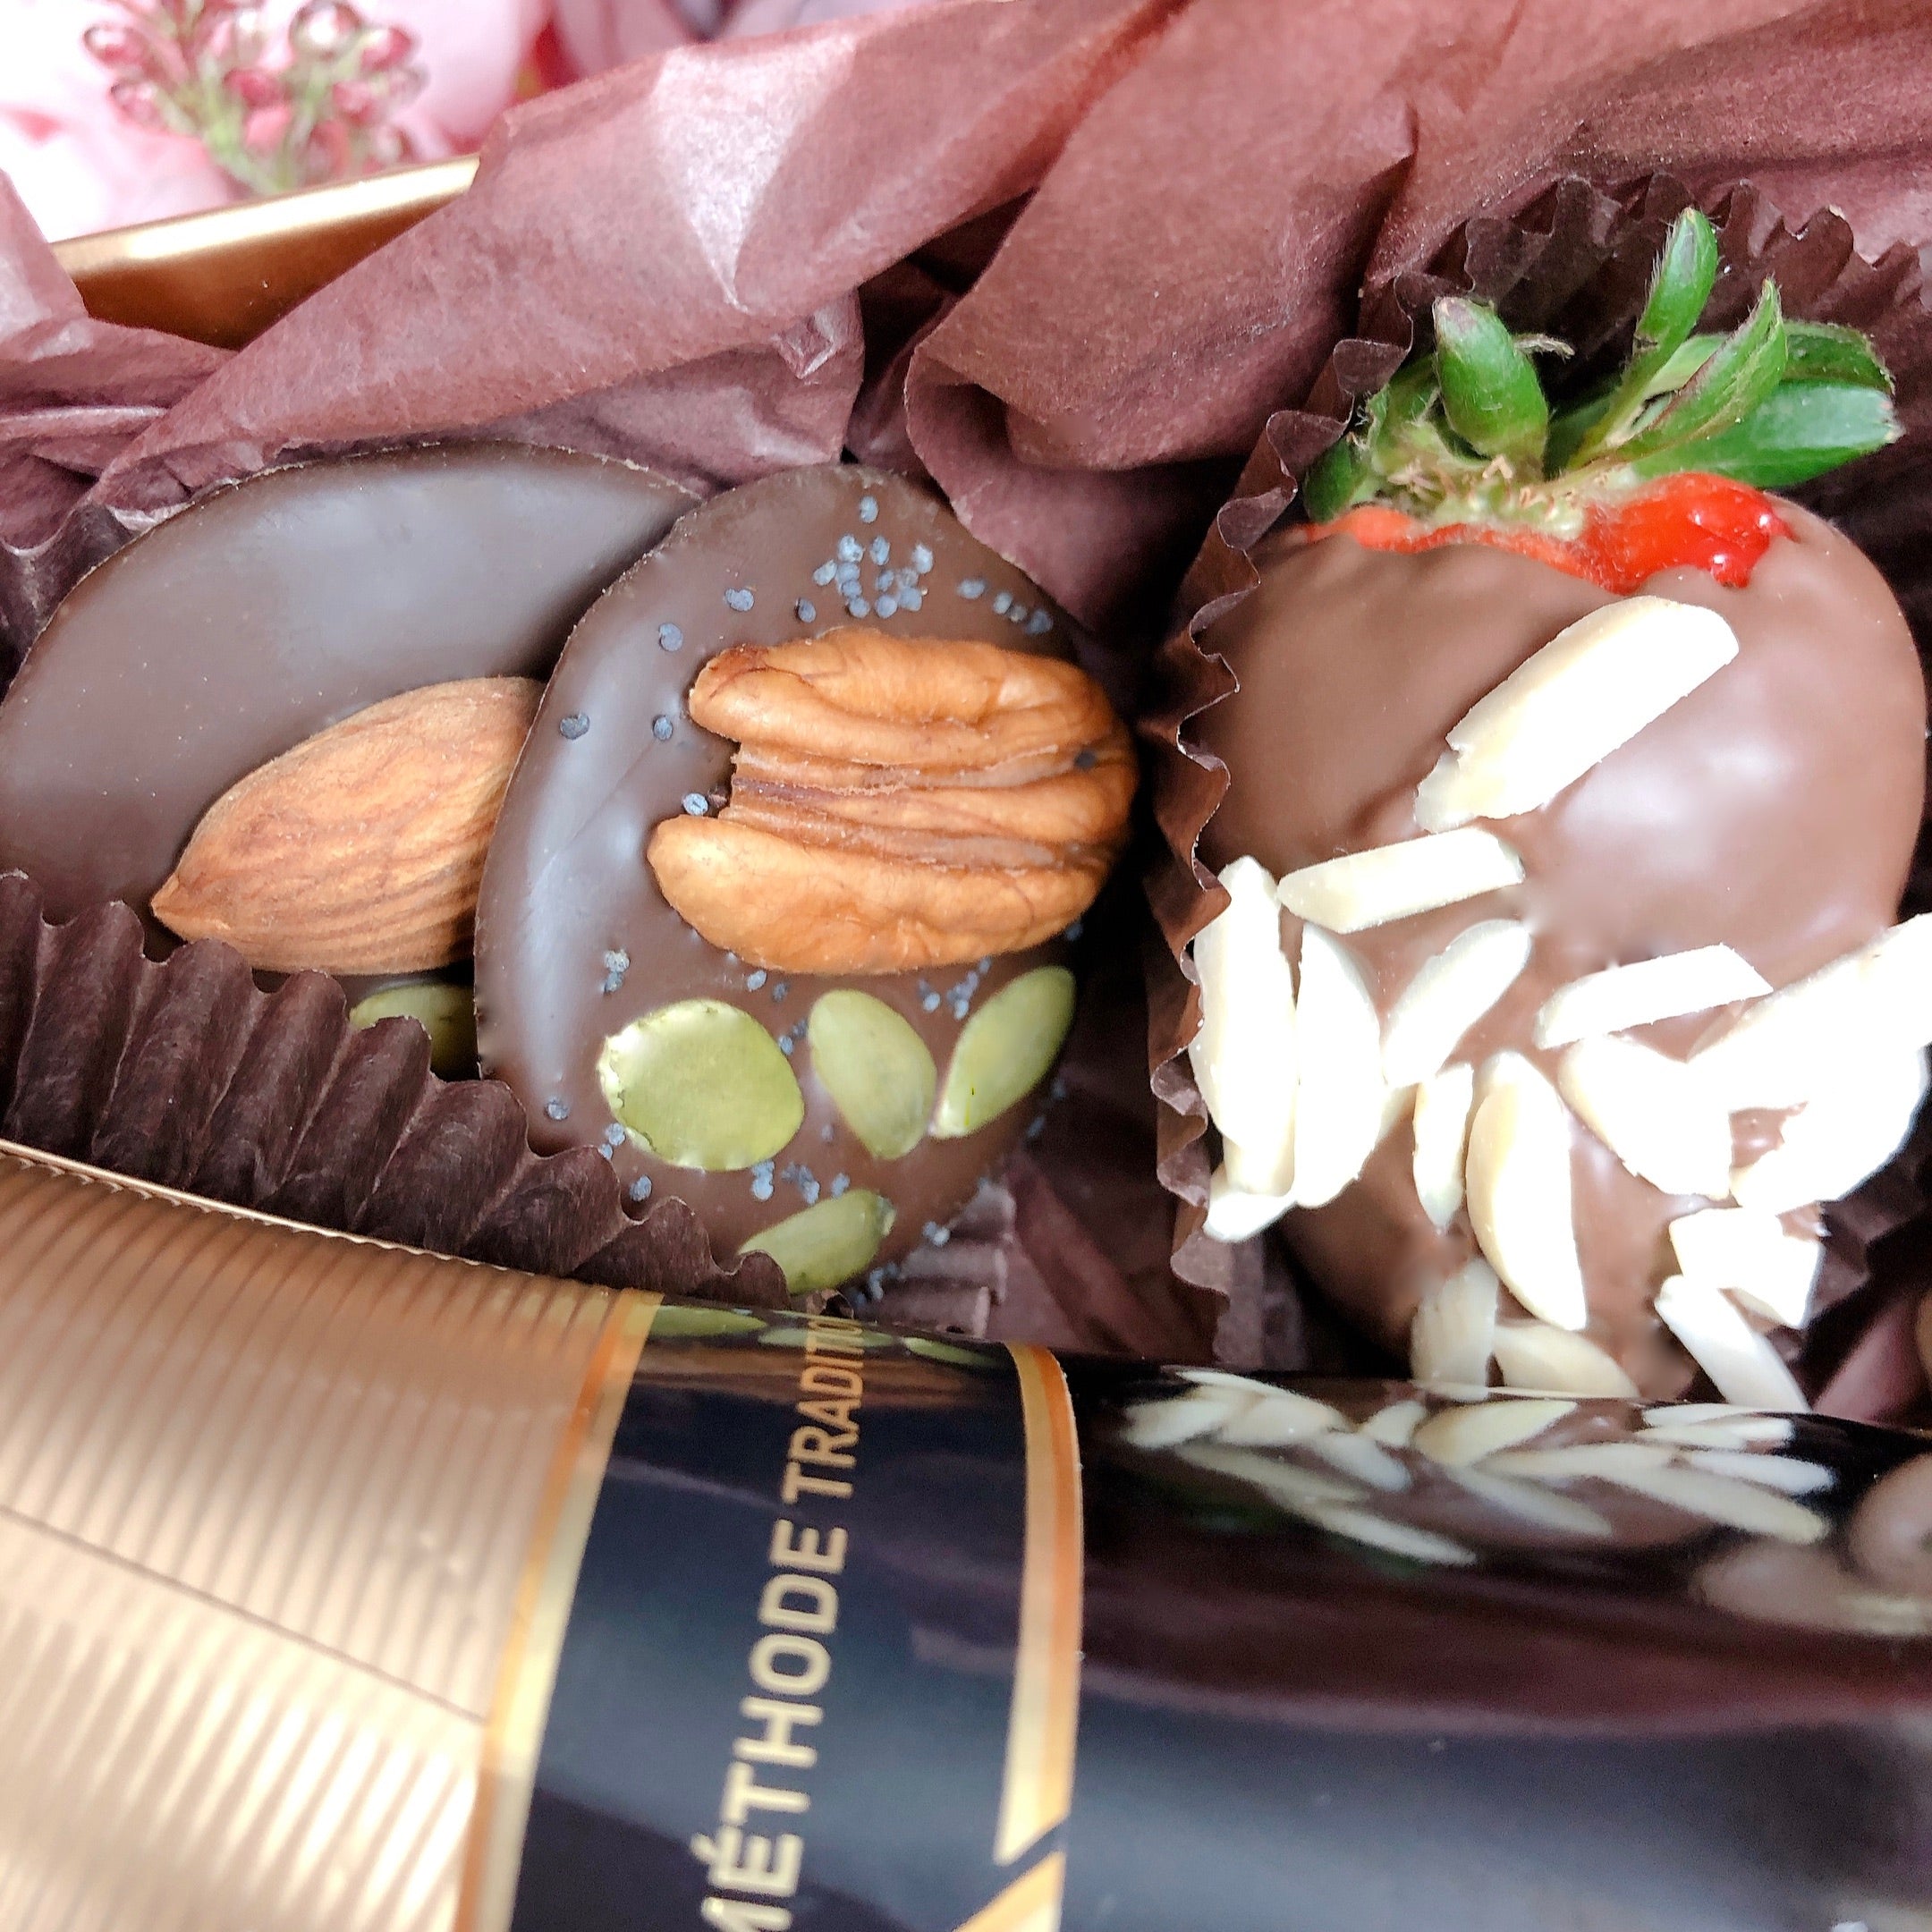 Chocolate covered strawberries and doughnuts in the Luxury chandon champagne hamper box